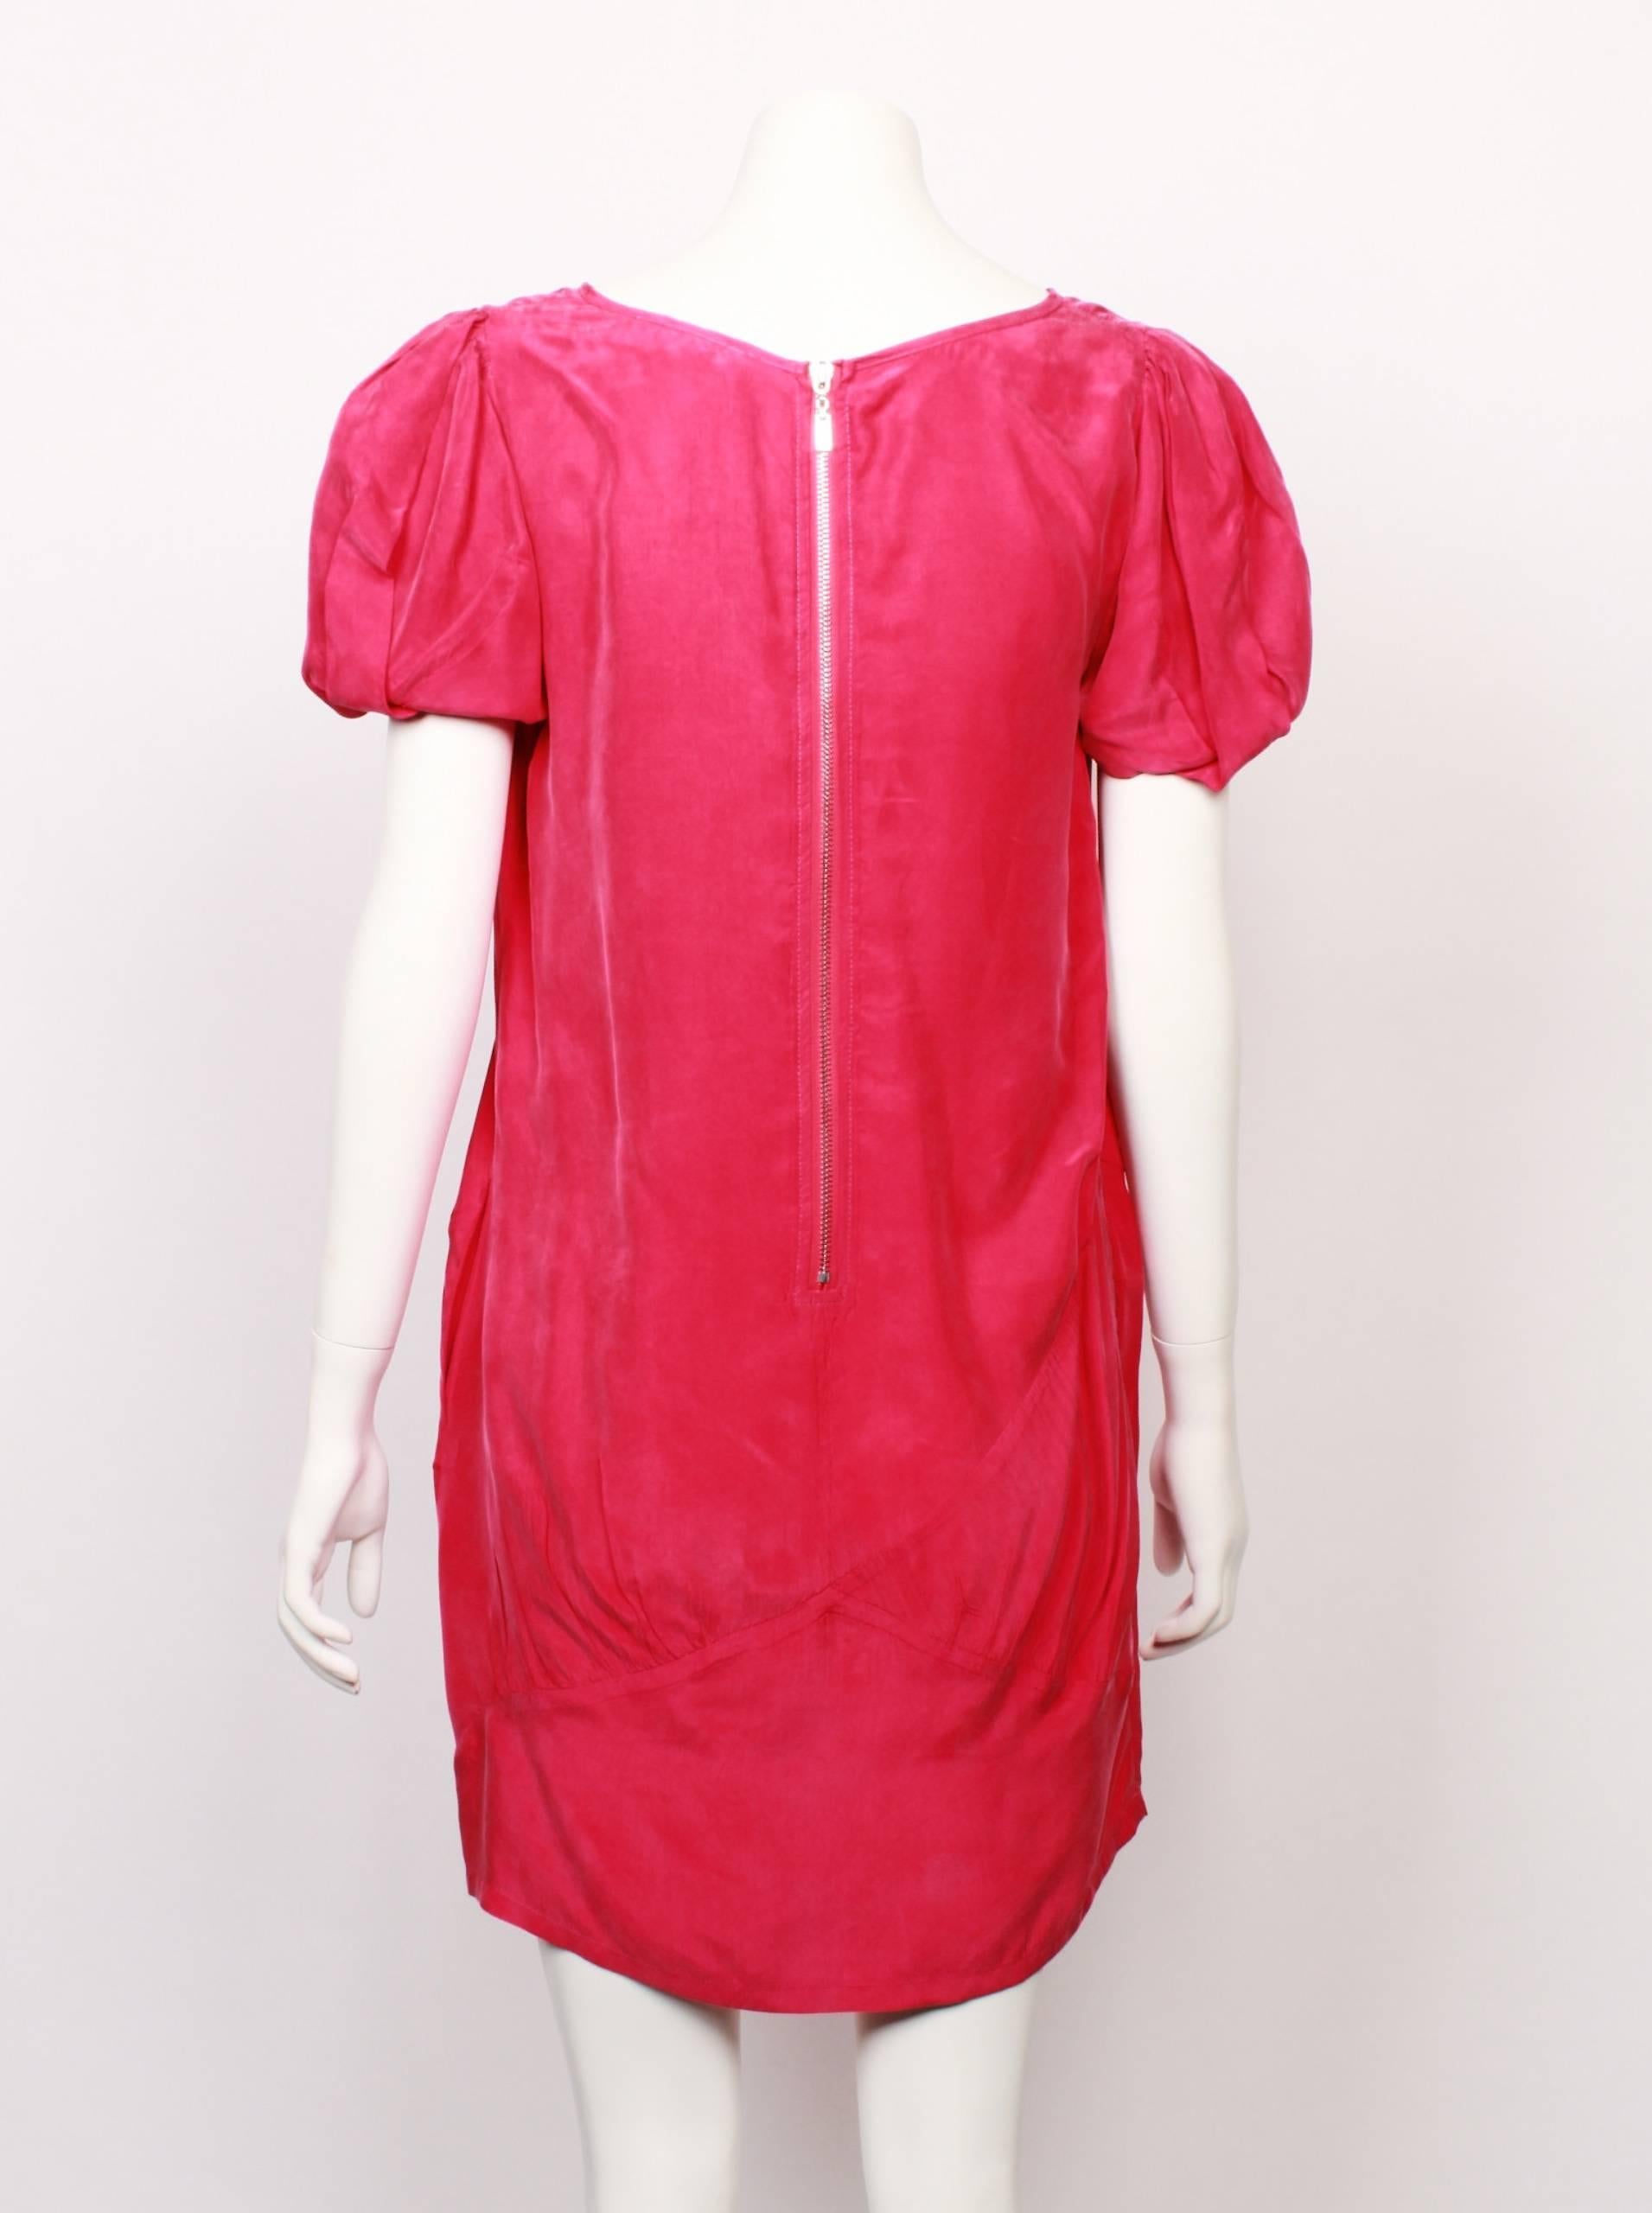 Hot pink Marni mini shift dress. Dress has a short slightly puffed sleeve and a feature chunky metal zipper closure. Made in Italy. 100%  silk charmeuse. Size 40.